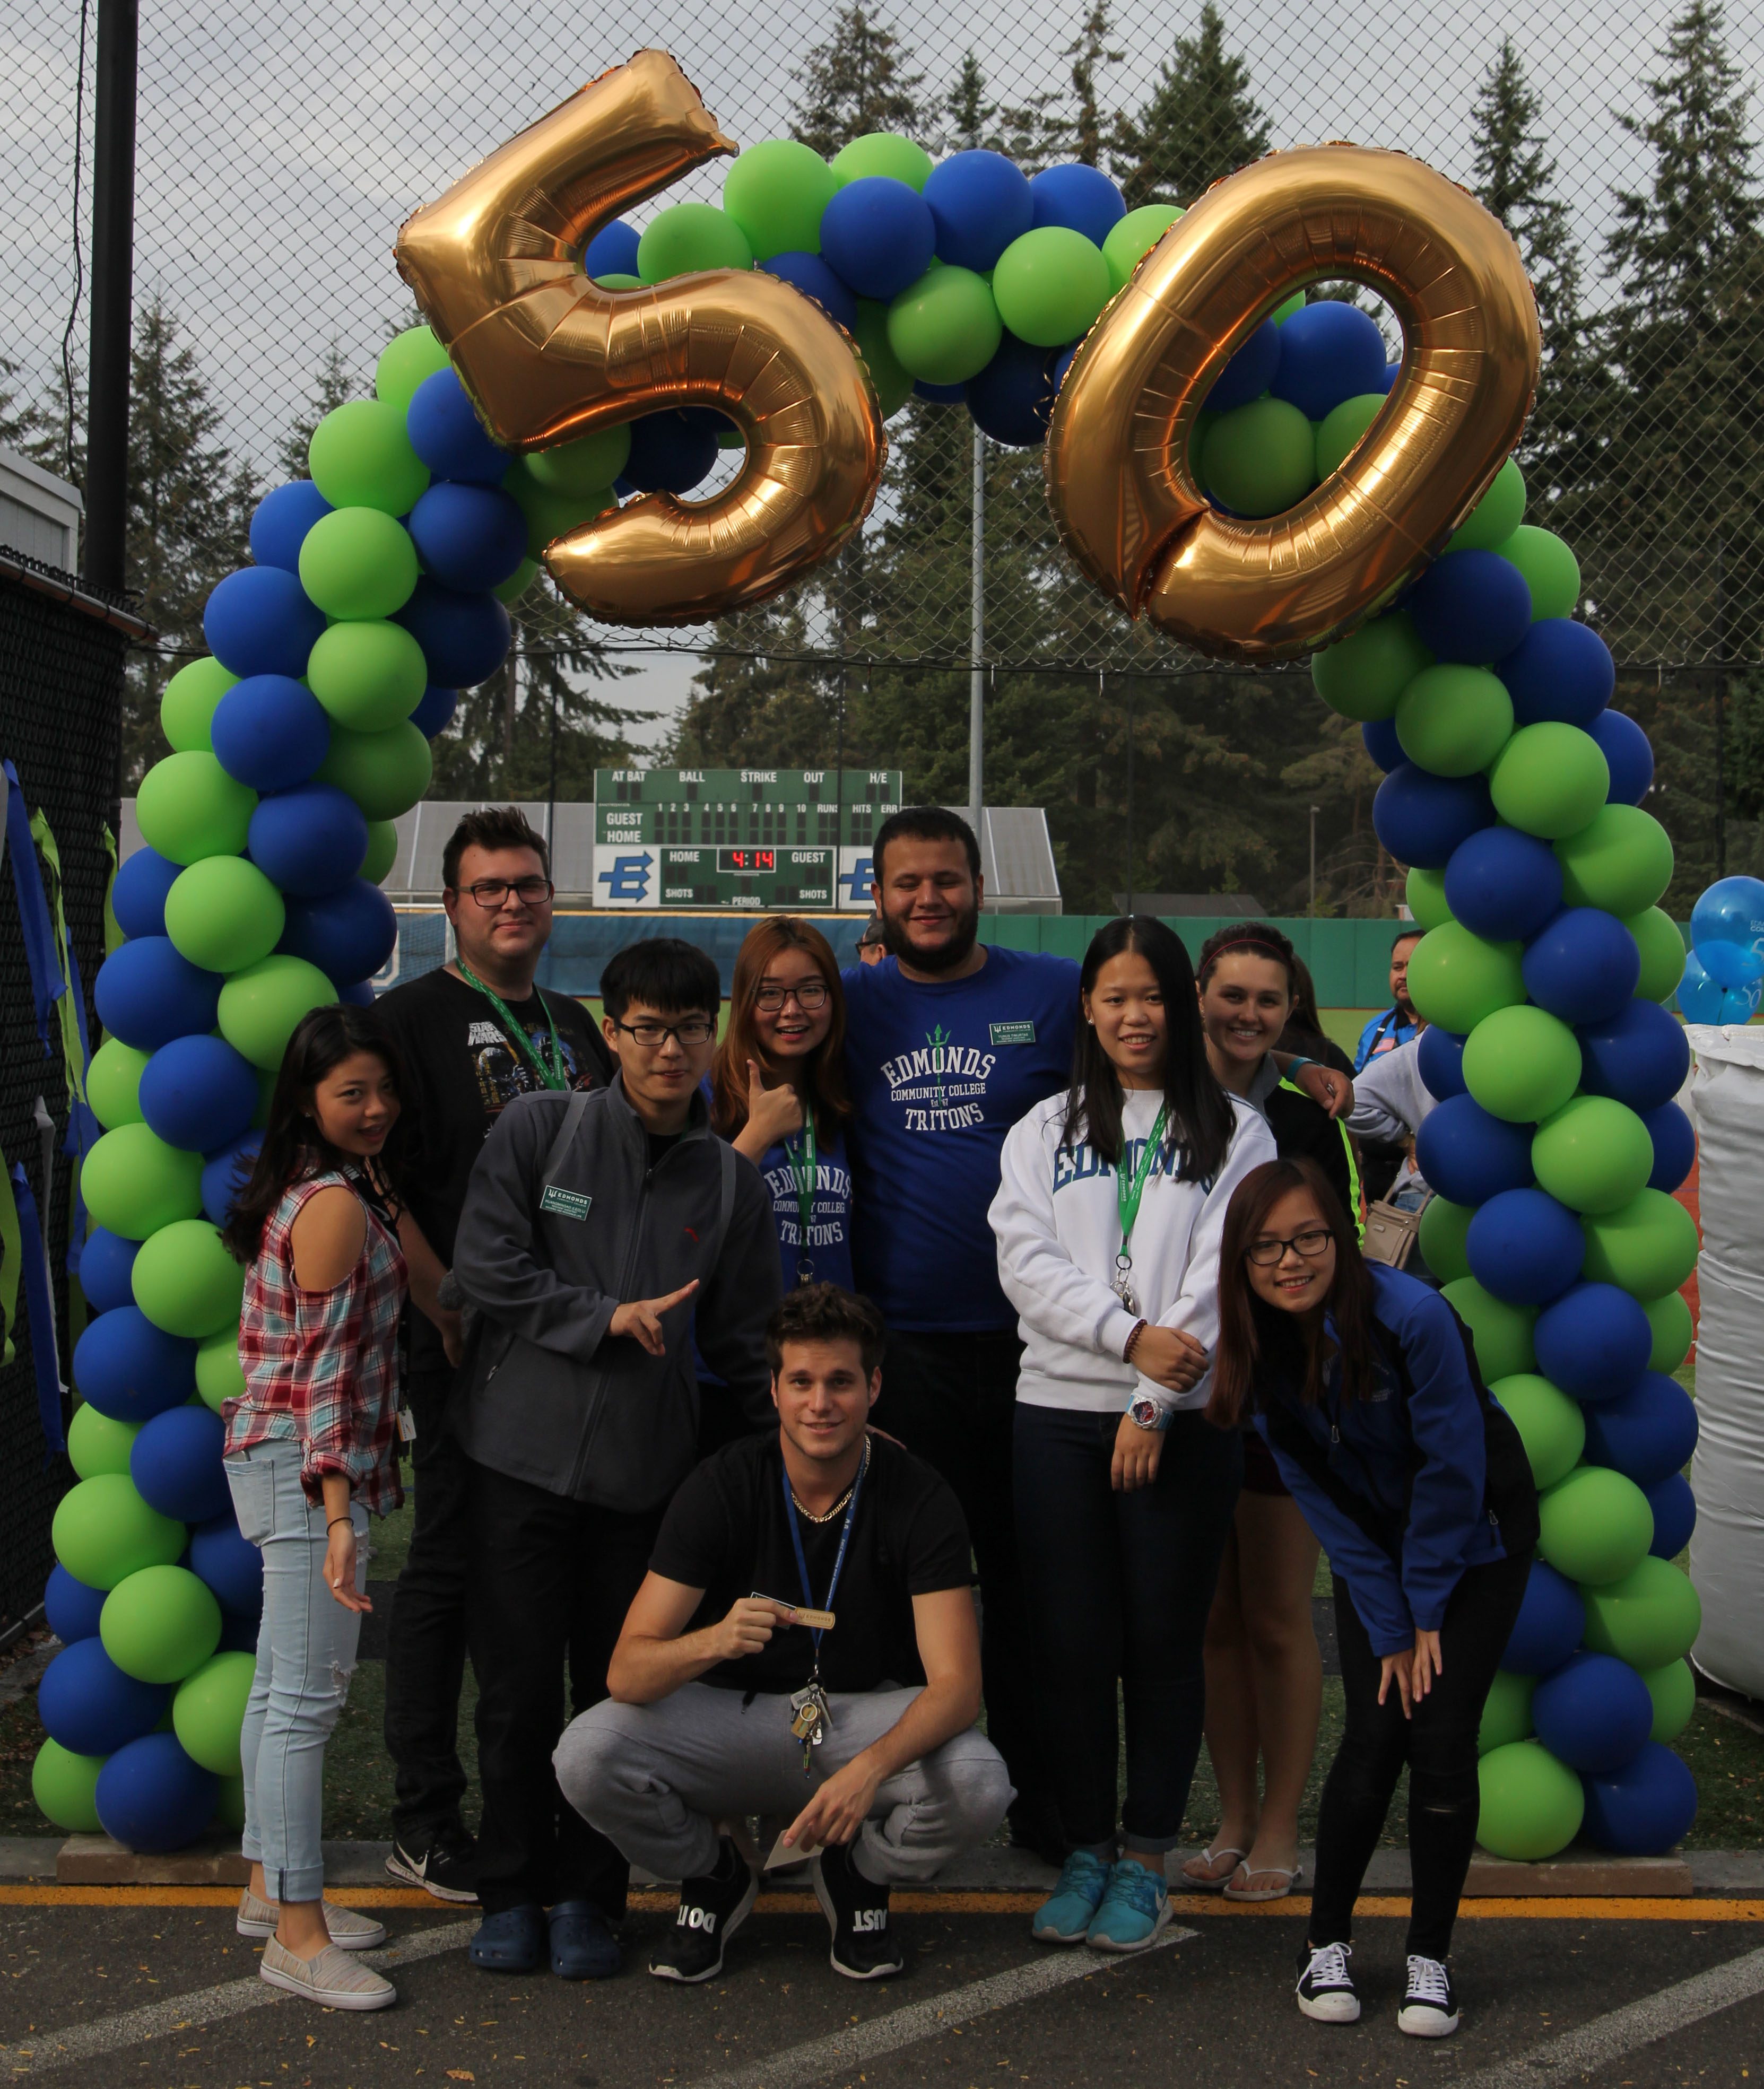 Students at the %0th anniversary celebration